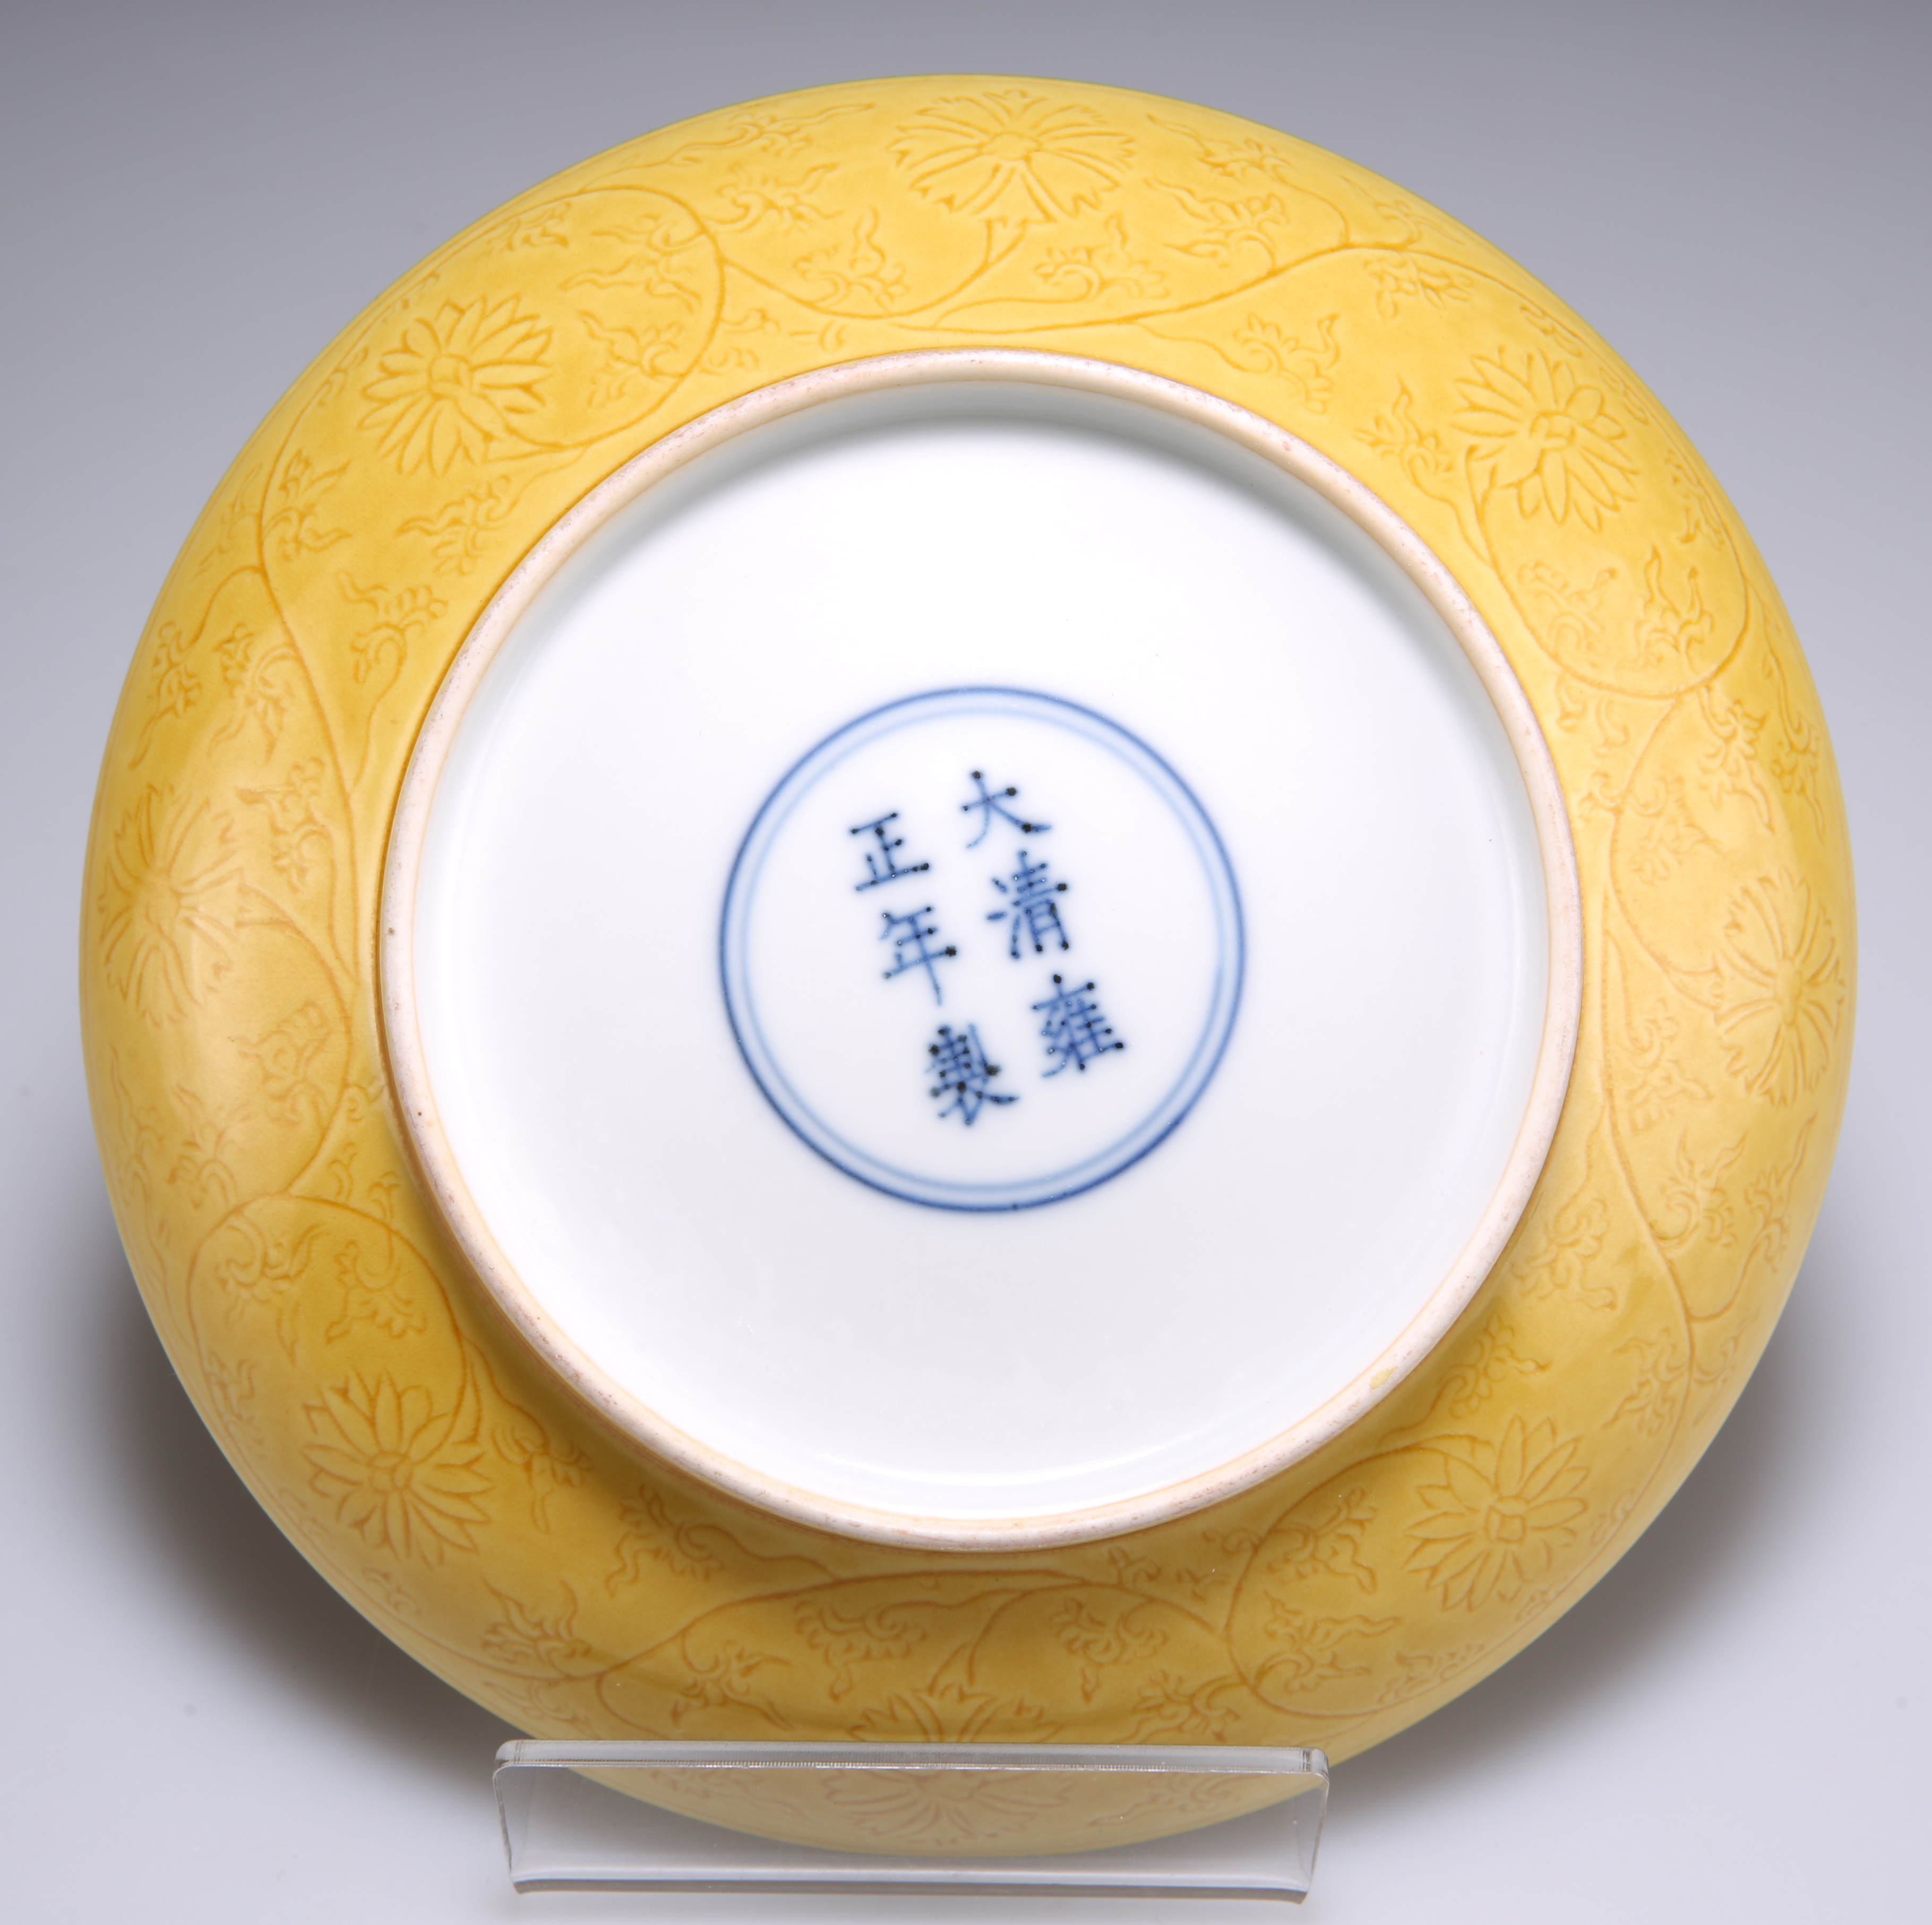 A CHINESE YELLOW-GLAZED PORCELAIN SAUCER DISH - Image 3 of 3